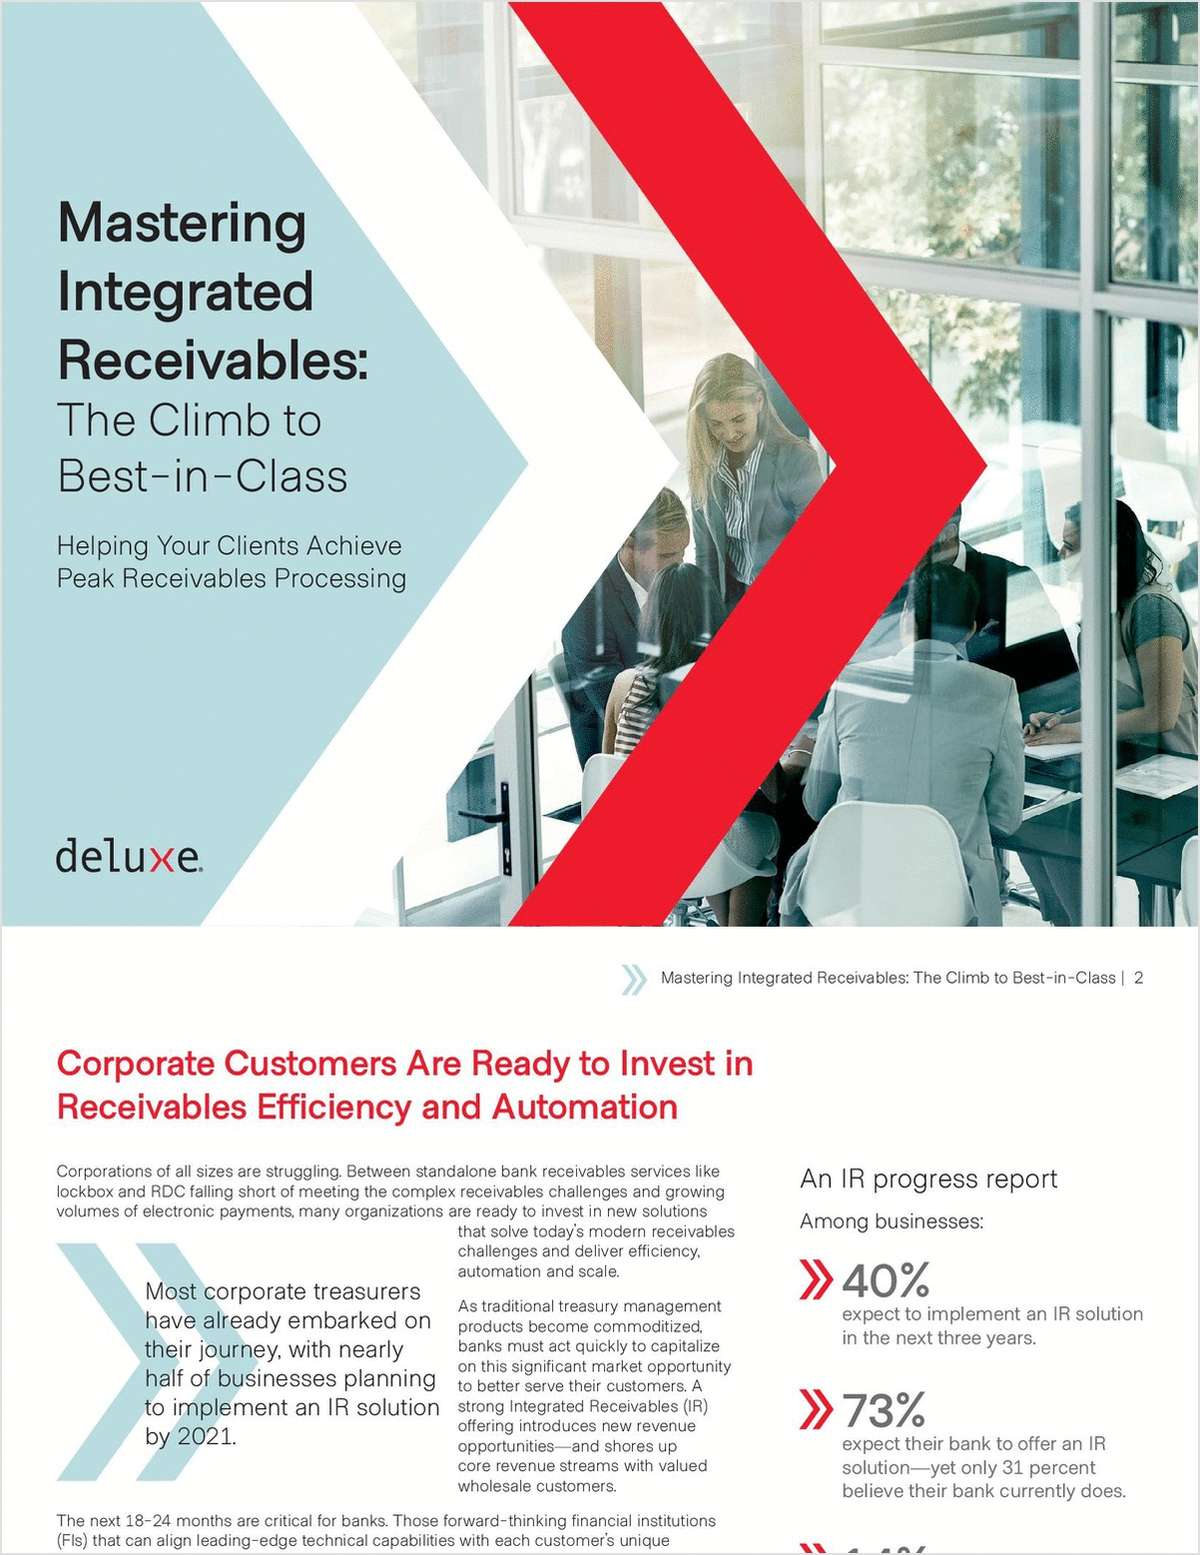 Mastering Integrated Receivables: The Climb to Best-in-Class